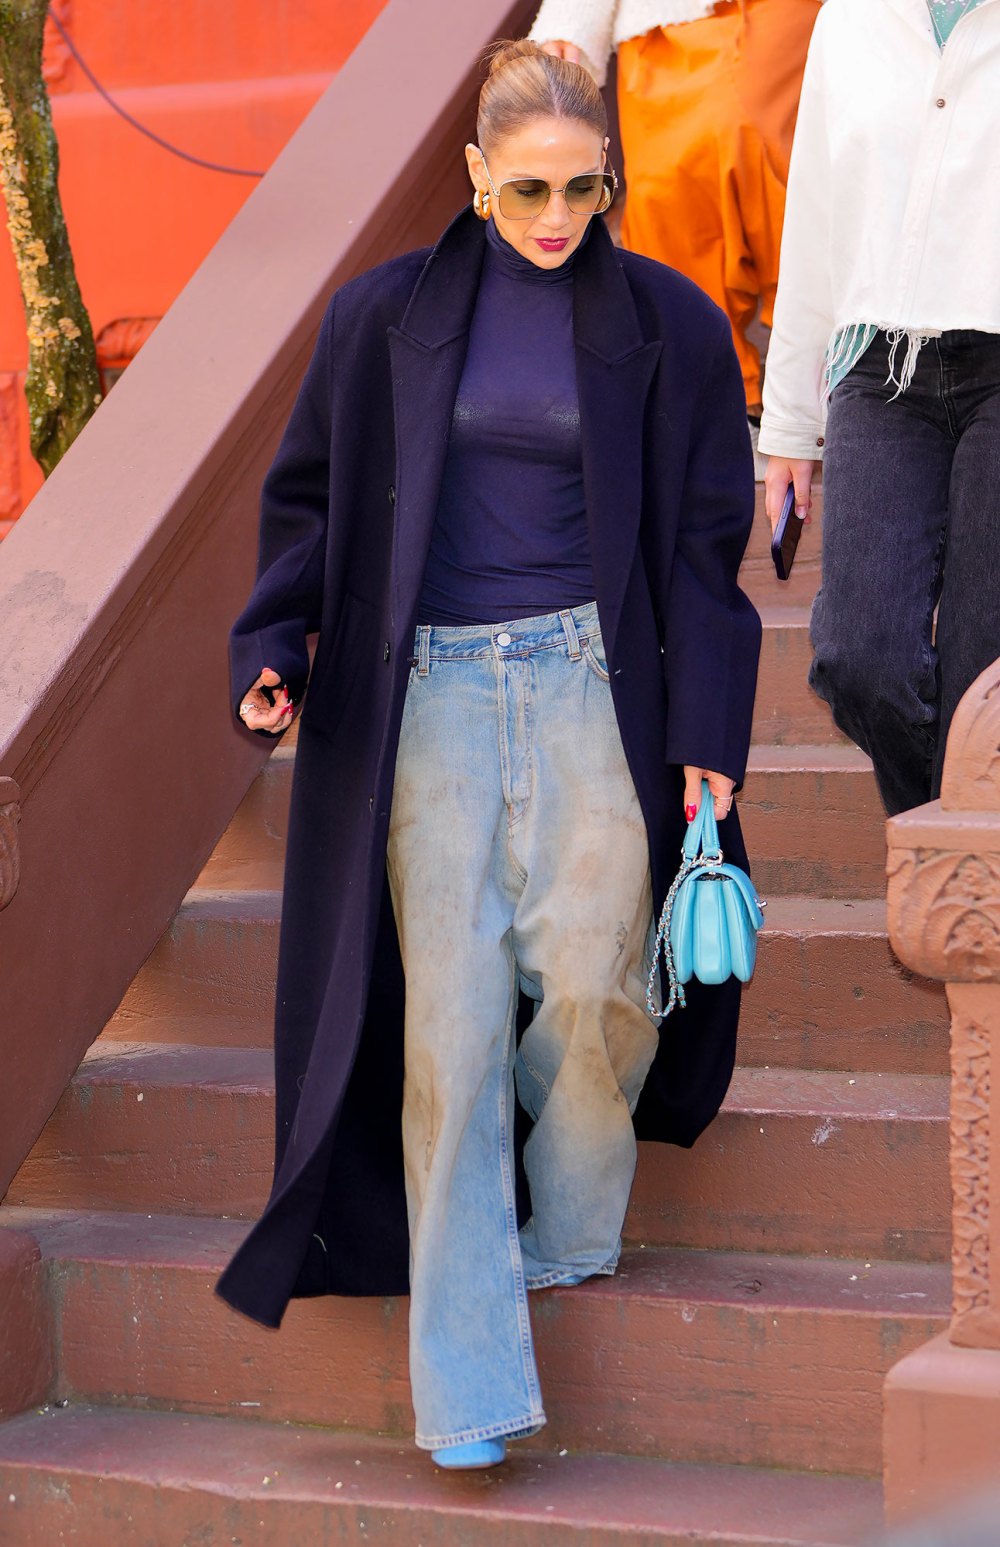 Feature Jennifer Lopez Elevates Faded Baggy Jeans With a Fitted Turtleneck and Sleek Up-Do